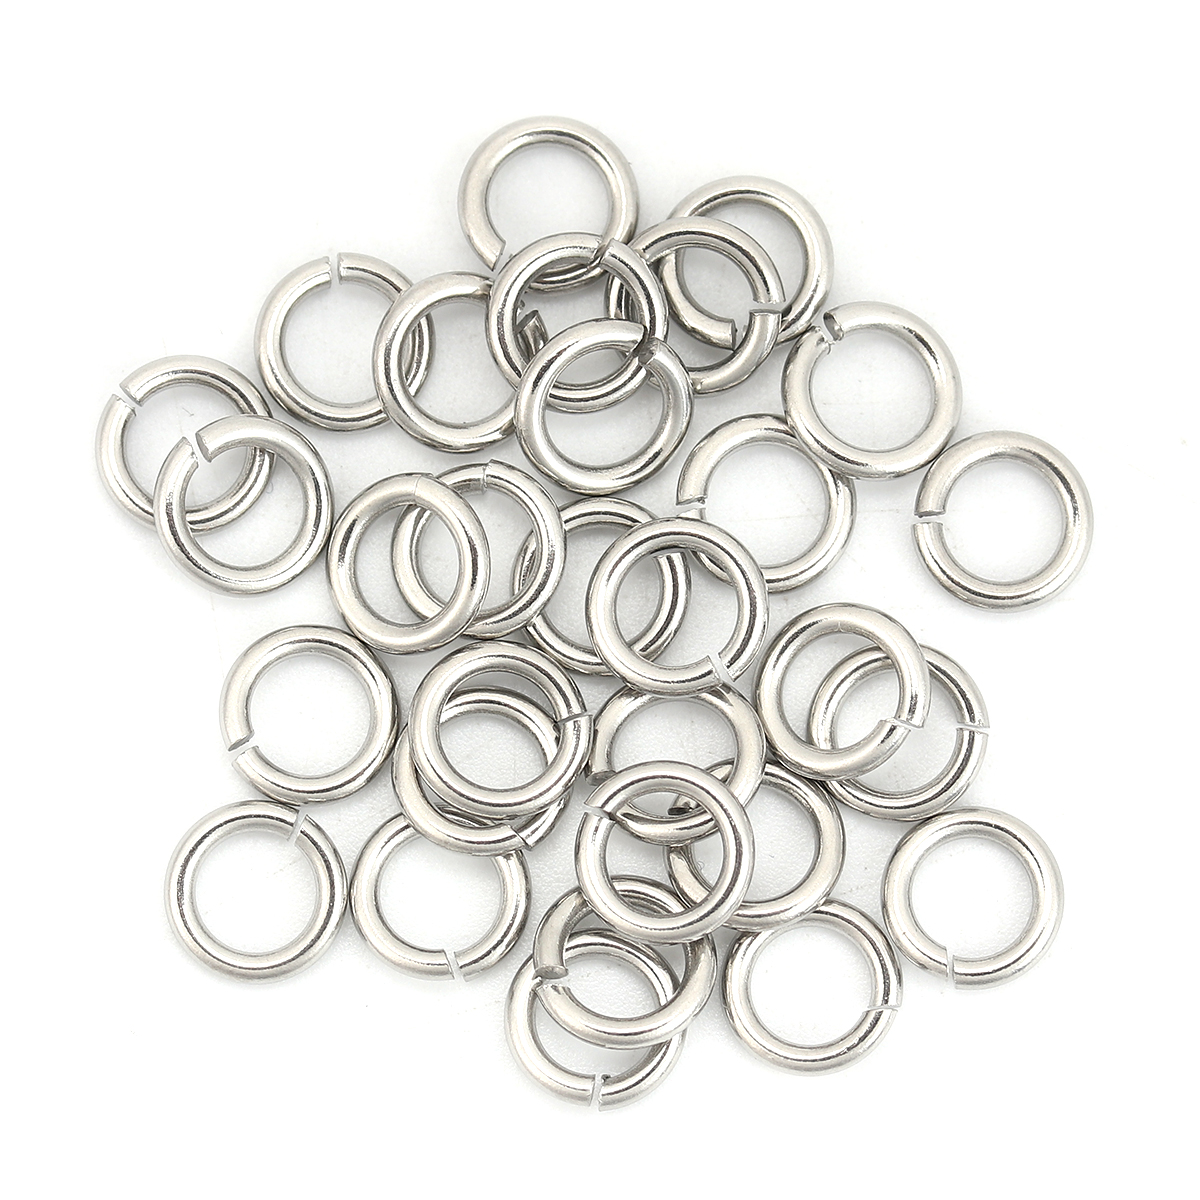 Picture of 1.4mm 304 Stainless Steel Opened Jump Rings Findings Silver Tone 8mm( 3/8") Dia., 100 PCs